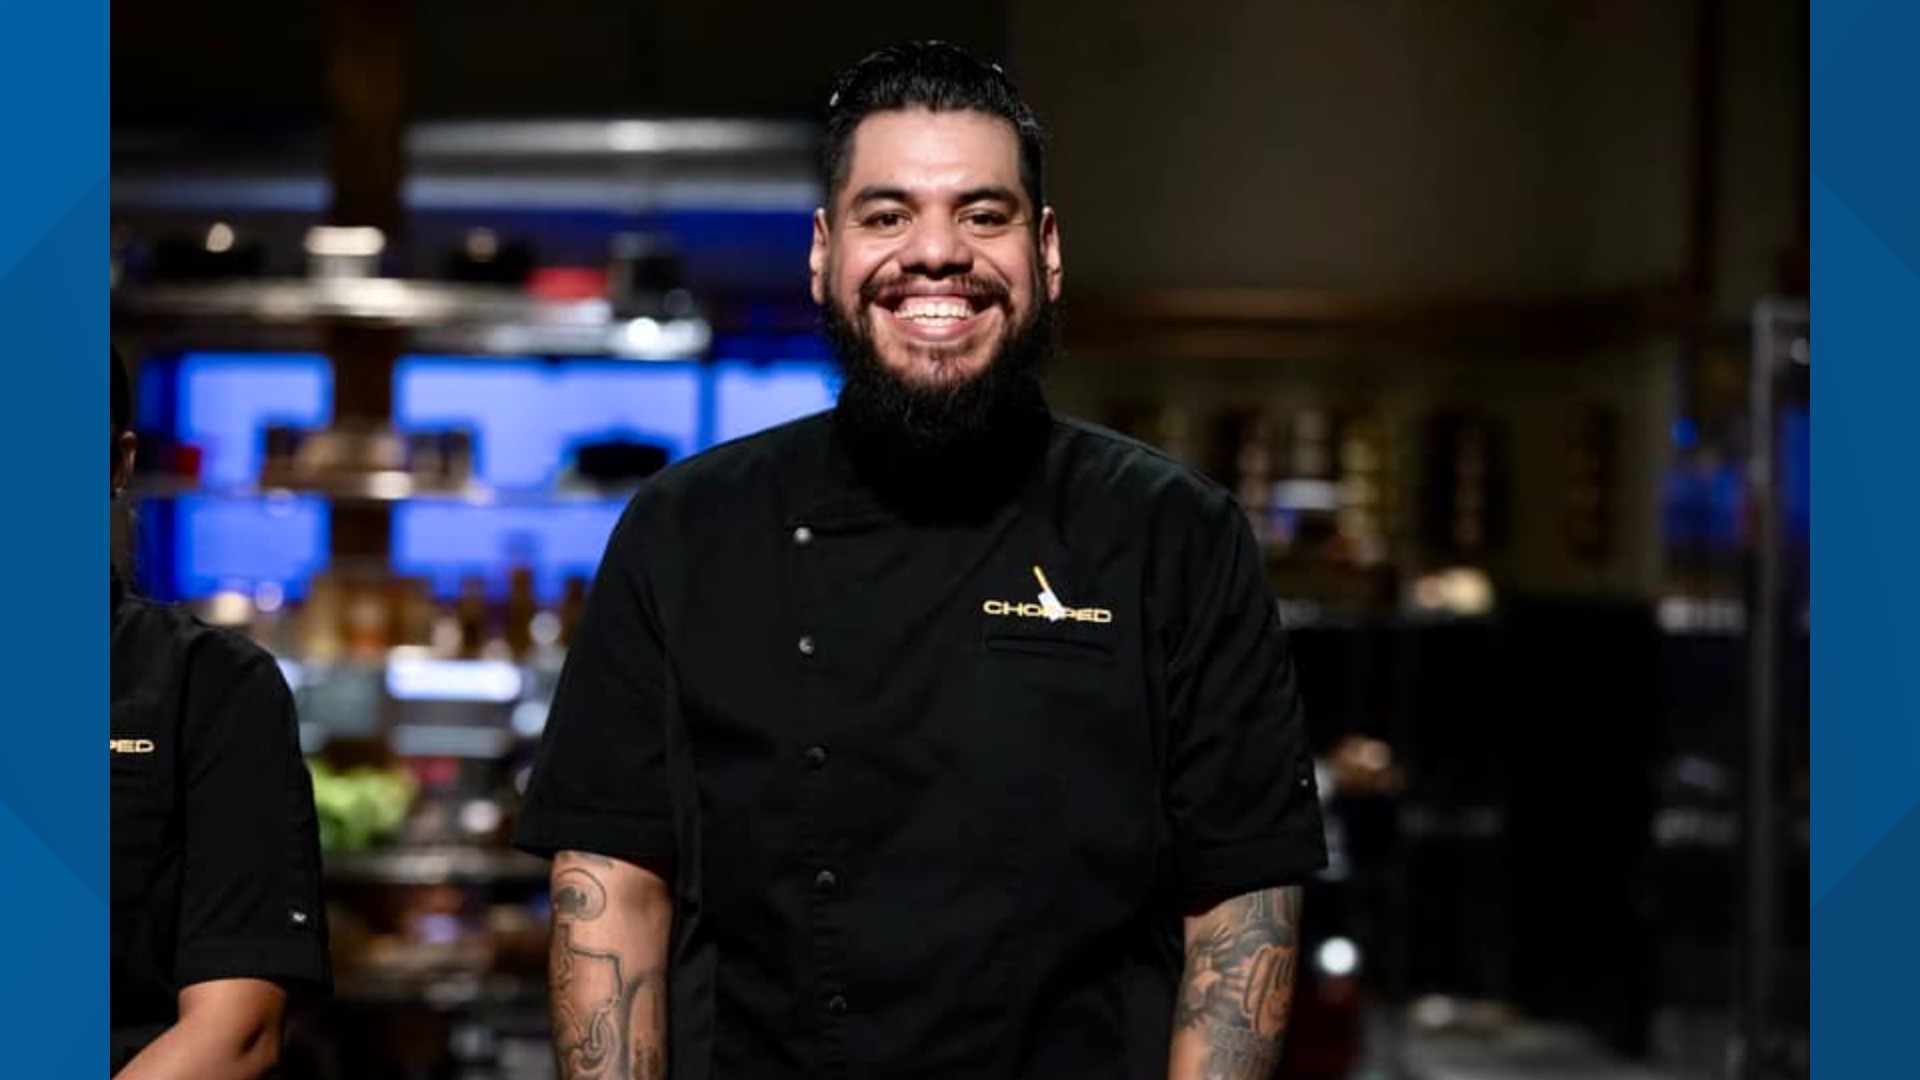 Alejandro Barrientos, chef and owner at Curb Side Bistro, outcooked three other chefs to claim his title.